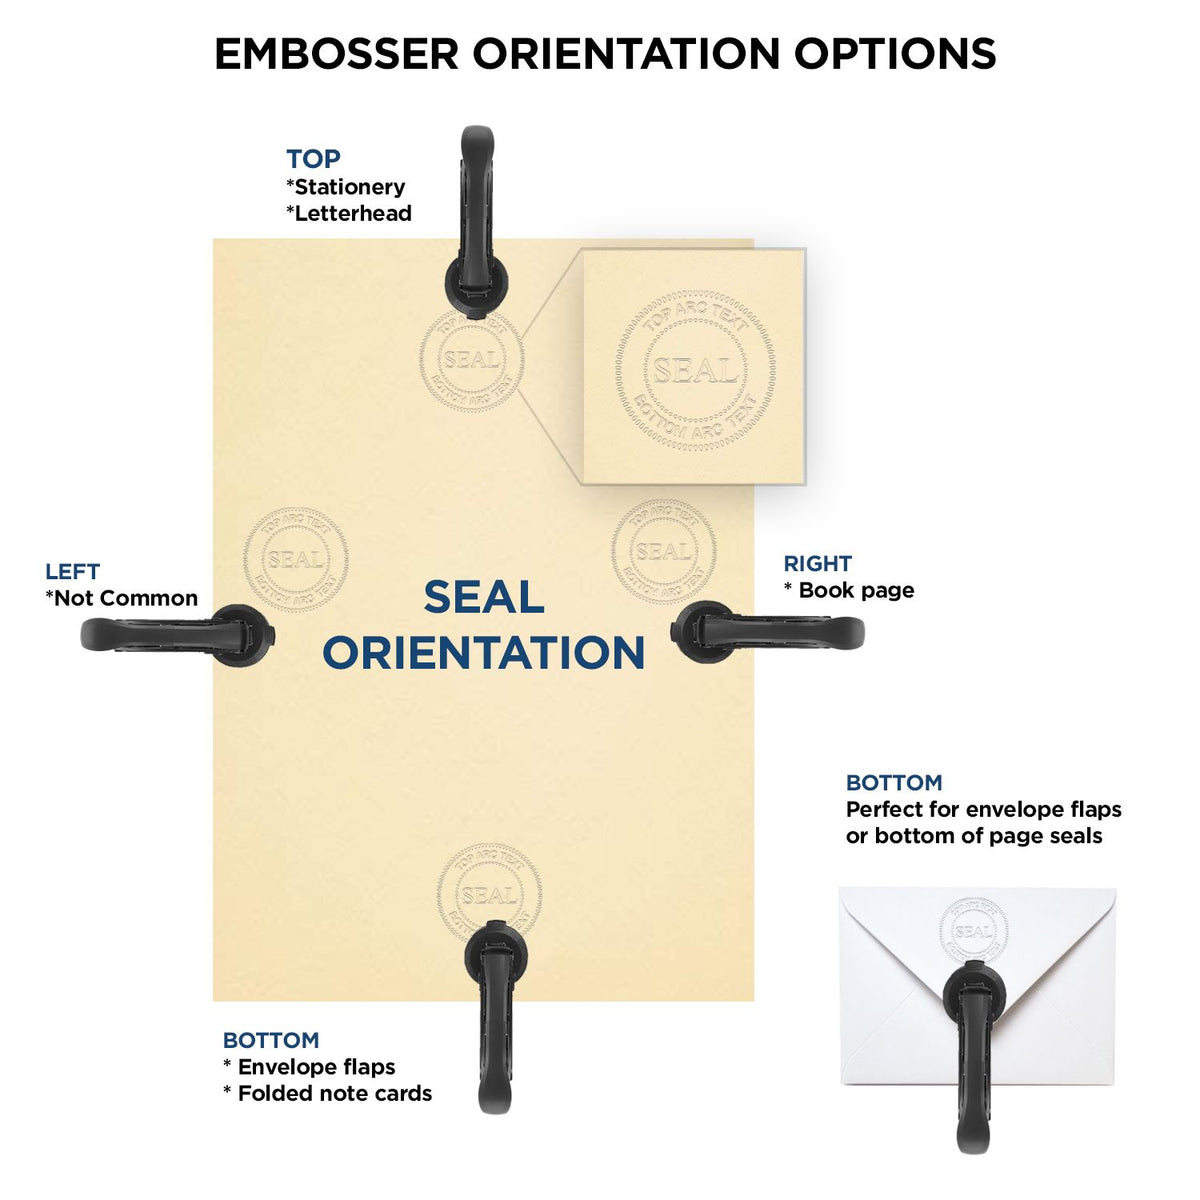 An infographic for the South Carolina Geologist Desk Seal showing embosser orientation, this is showing examples of a top, bottom, right and left insert.